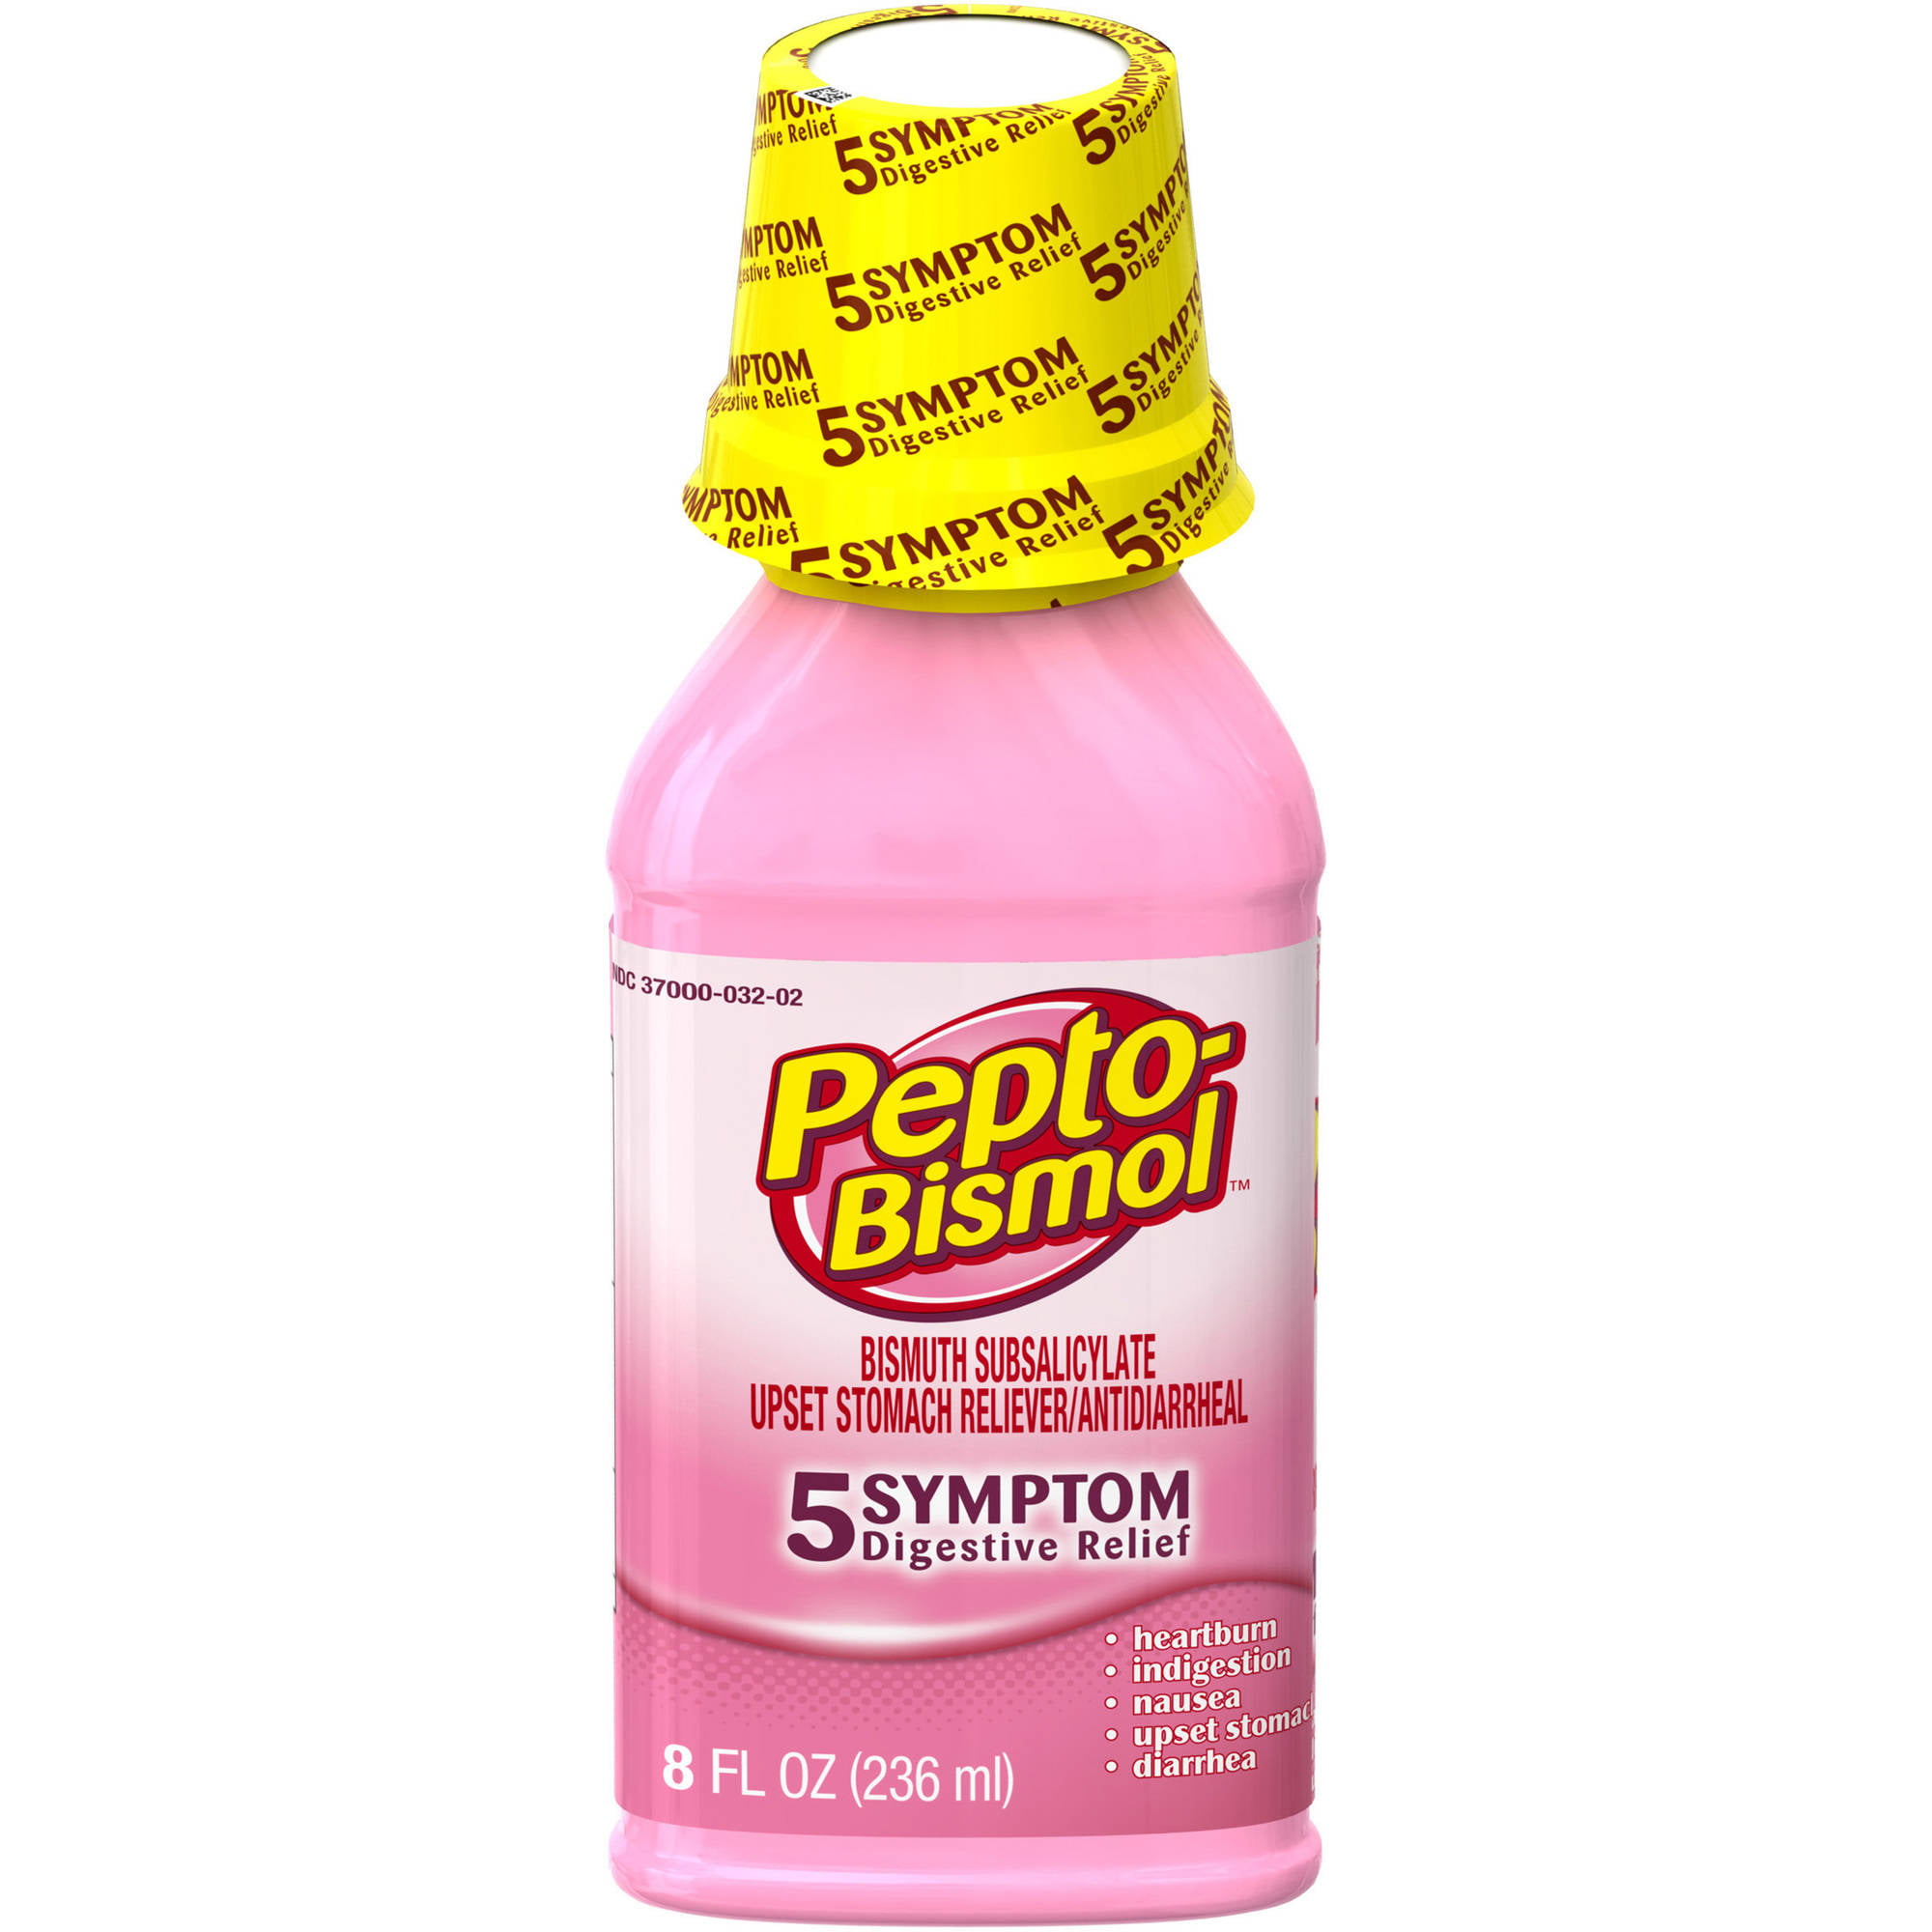 What dosage of Pepto-Bismol do you give to a 45-pound dog for diarrhea?